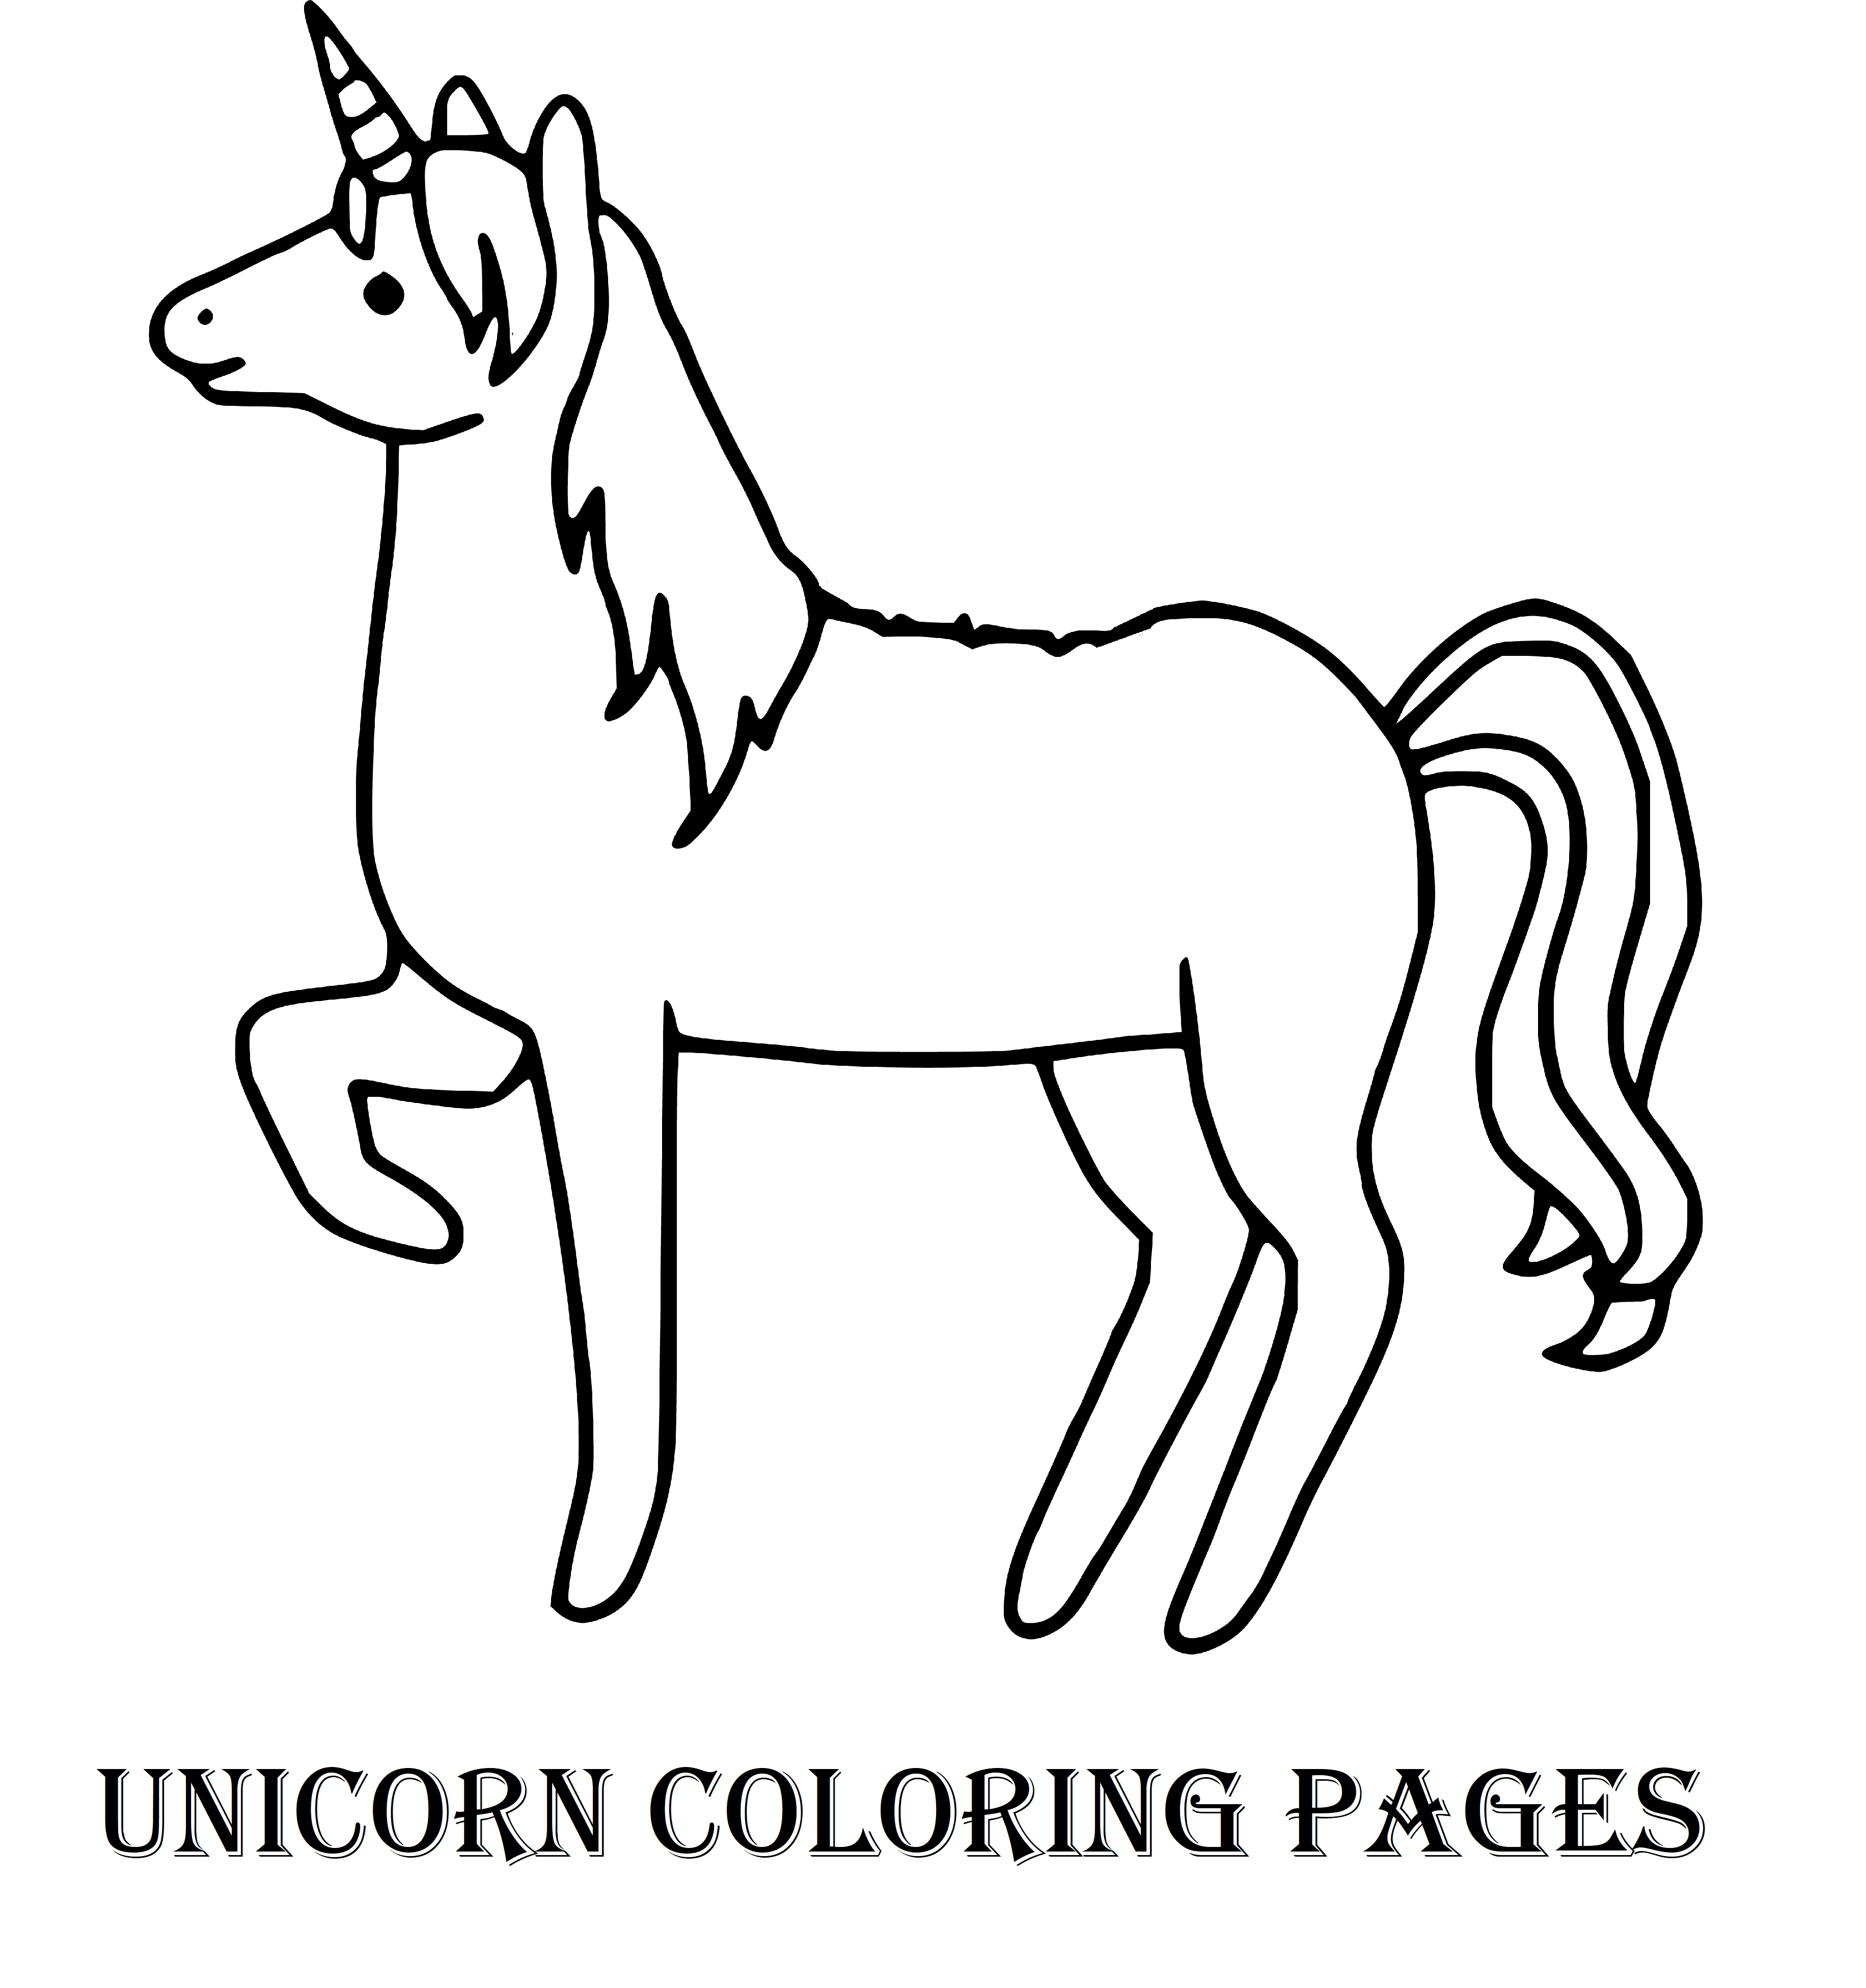 Printable A  unicorn illustration. One of the most ideal options for drawing and  for children Coloring Page for kids.